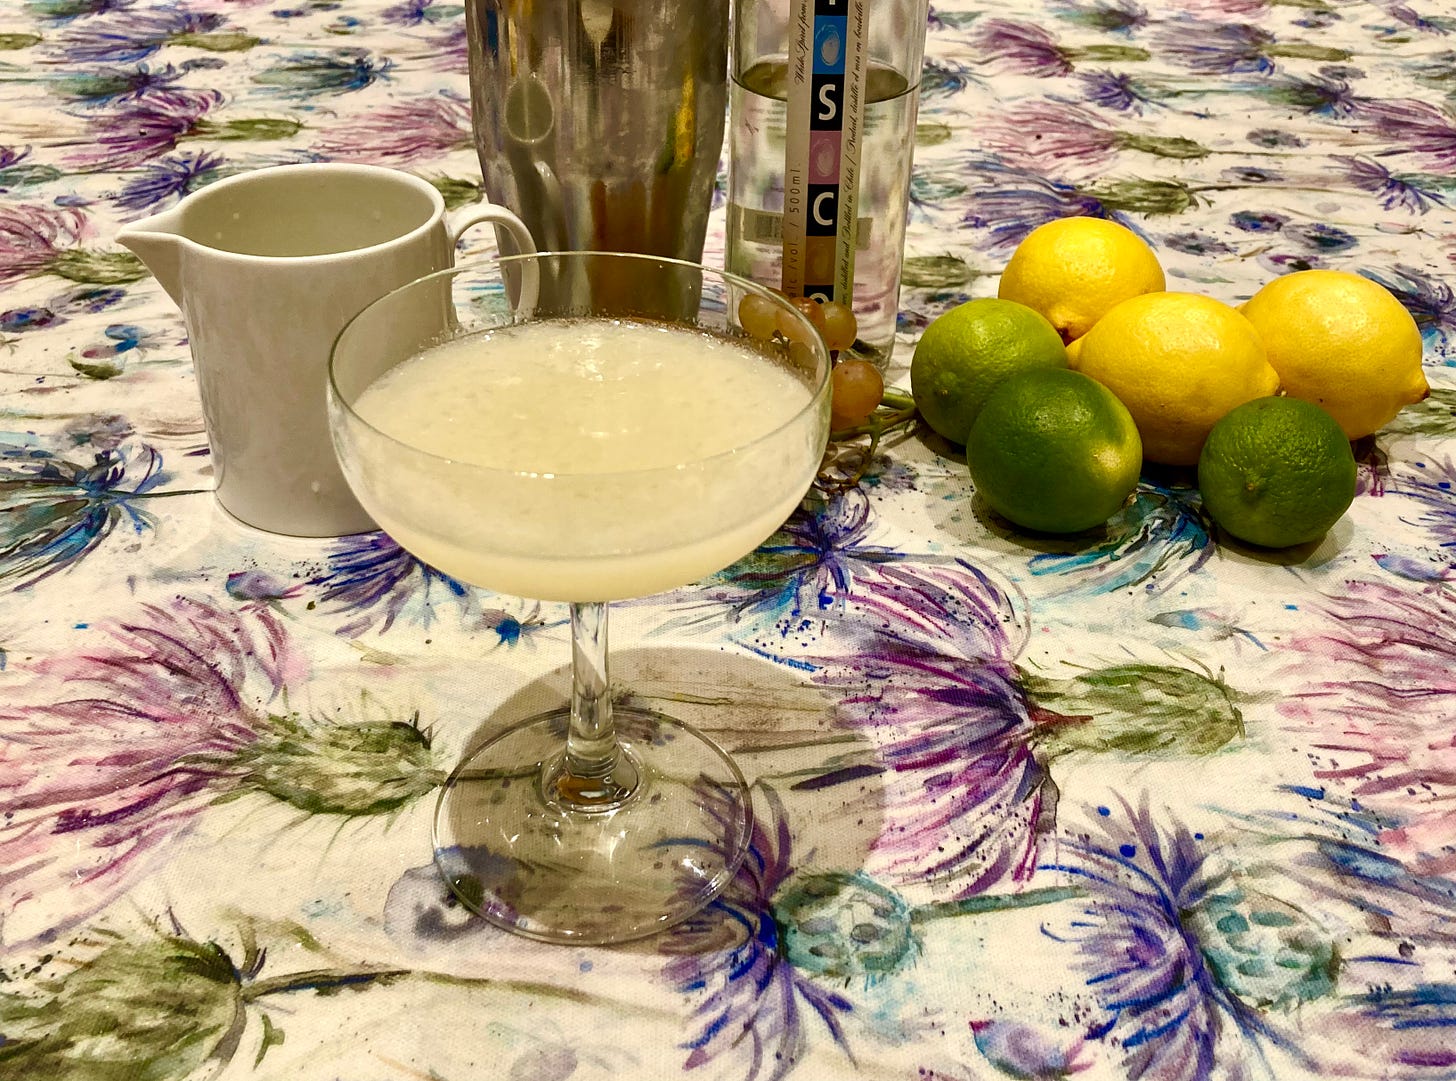 A Pisco Sour in a coupe glass, on a table with a shaker, jug of citrus juice, bottle of pisco, and some citrus fruit as decoration.